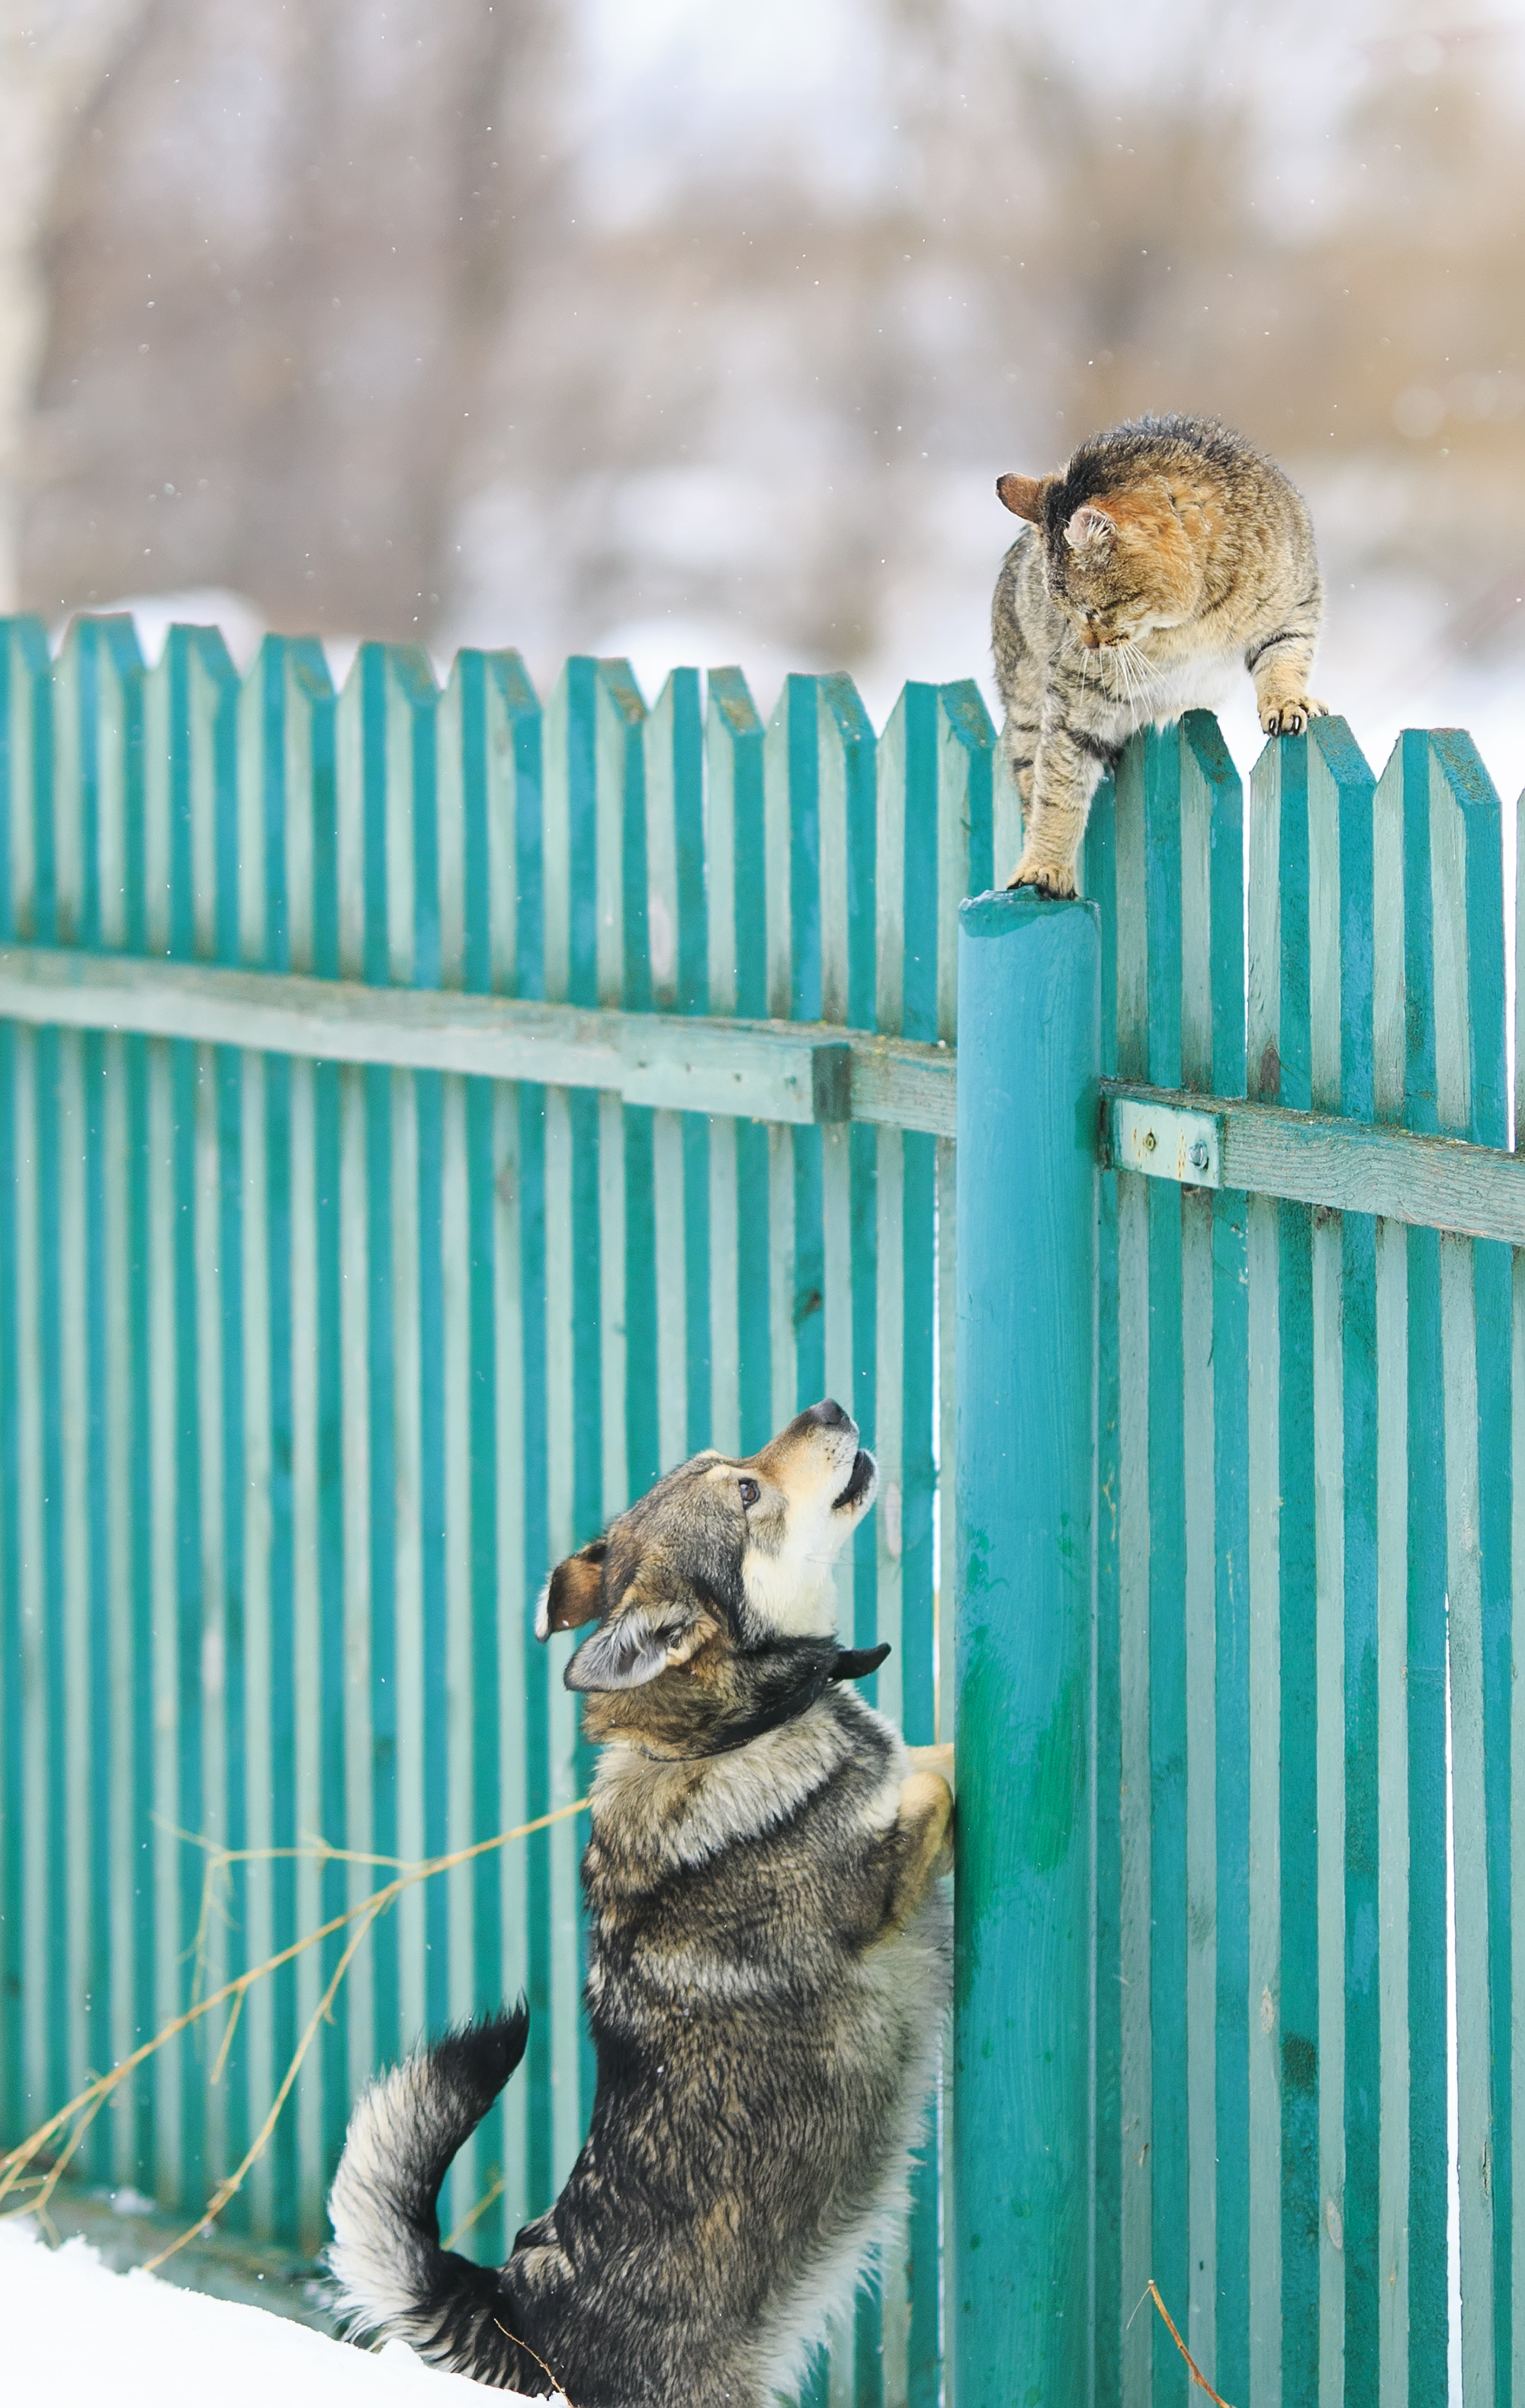 A dog chased the cat on a high wooden fence in the village | Source: Shutterstock